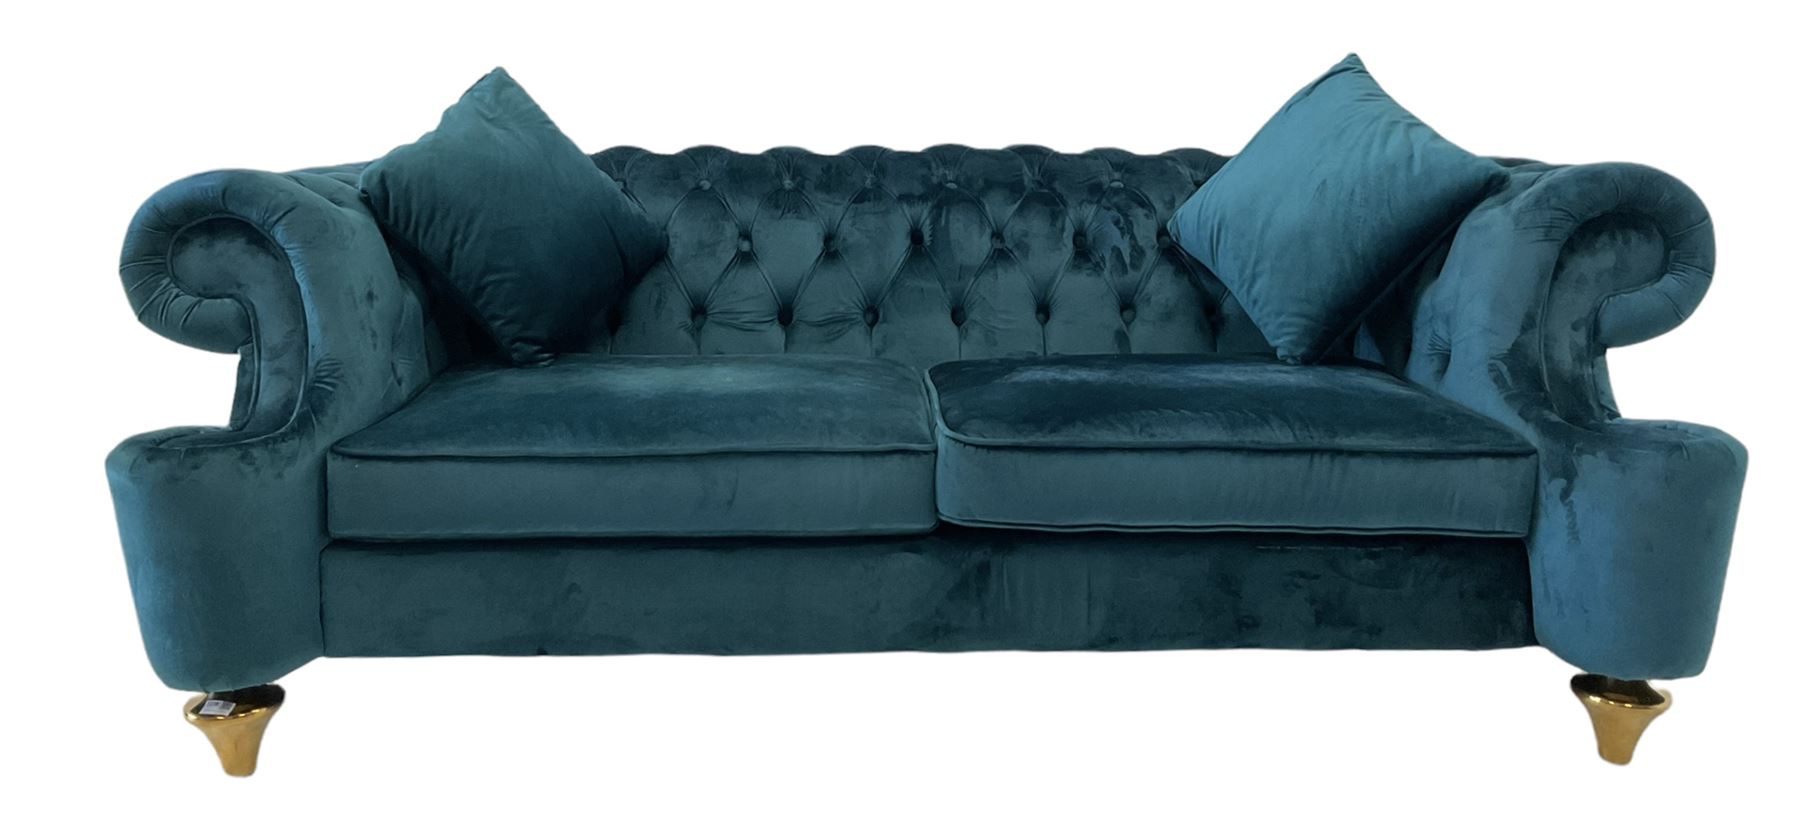 Chesterfield style two seat sofa